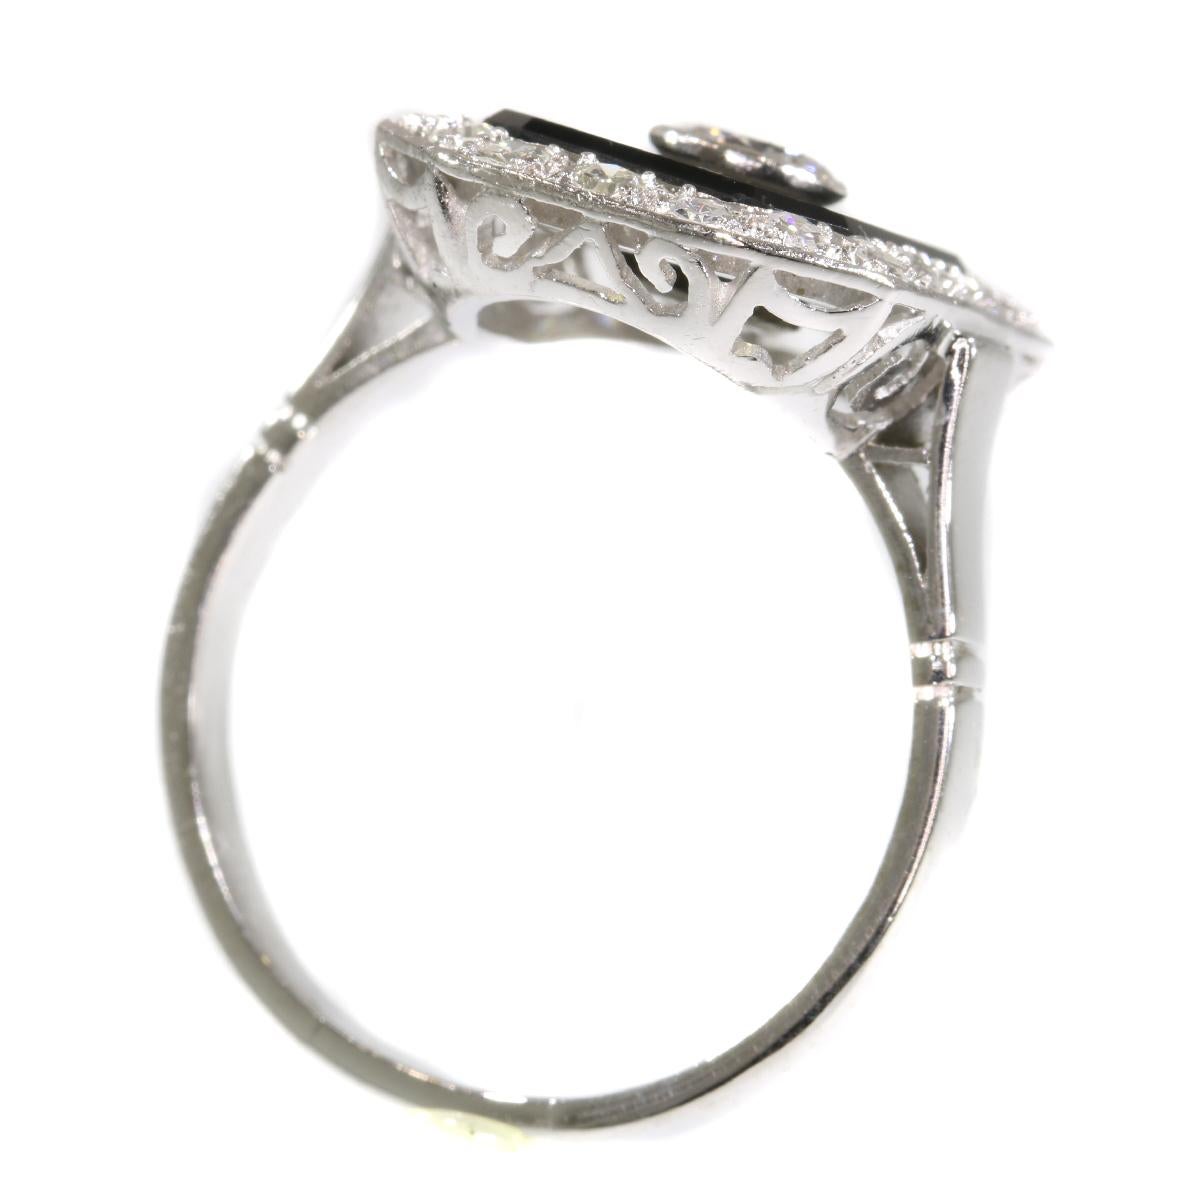 Vintage Platinum Art Deco Style Diamond and Onyx Ring from the 1950s 1